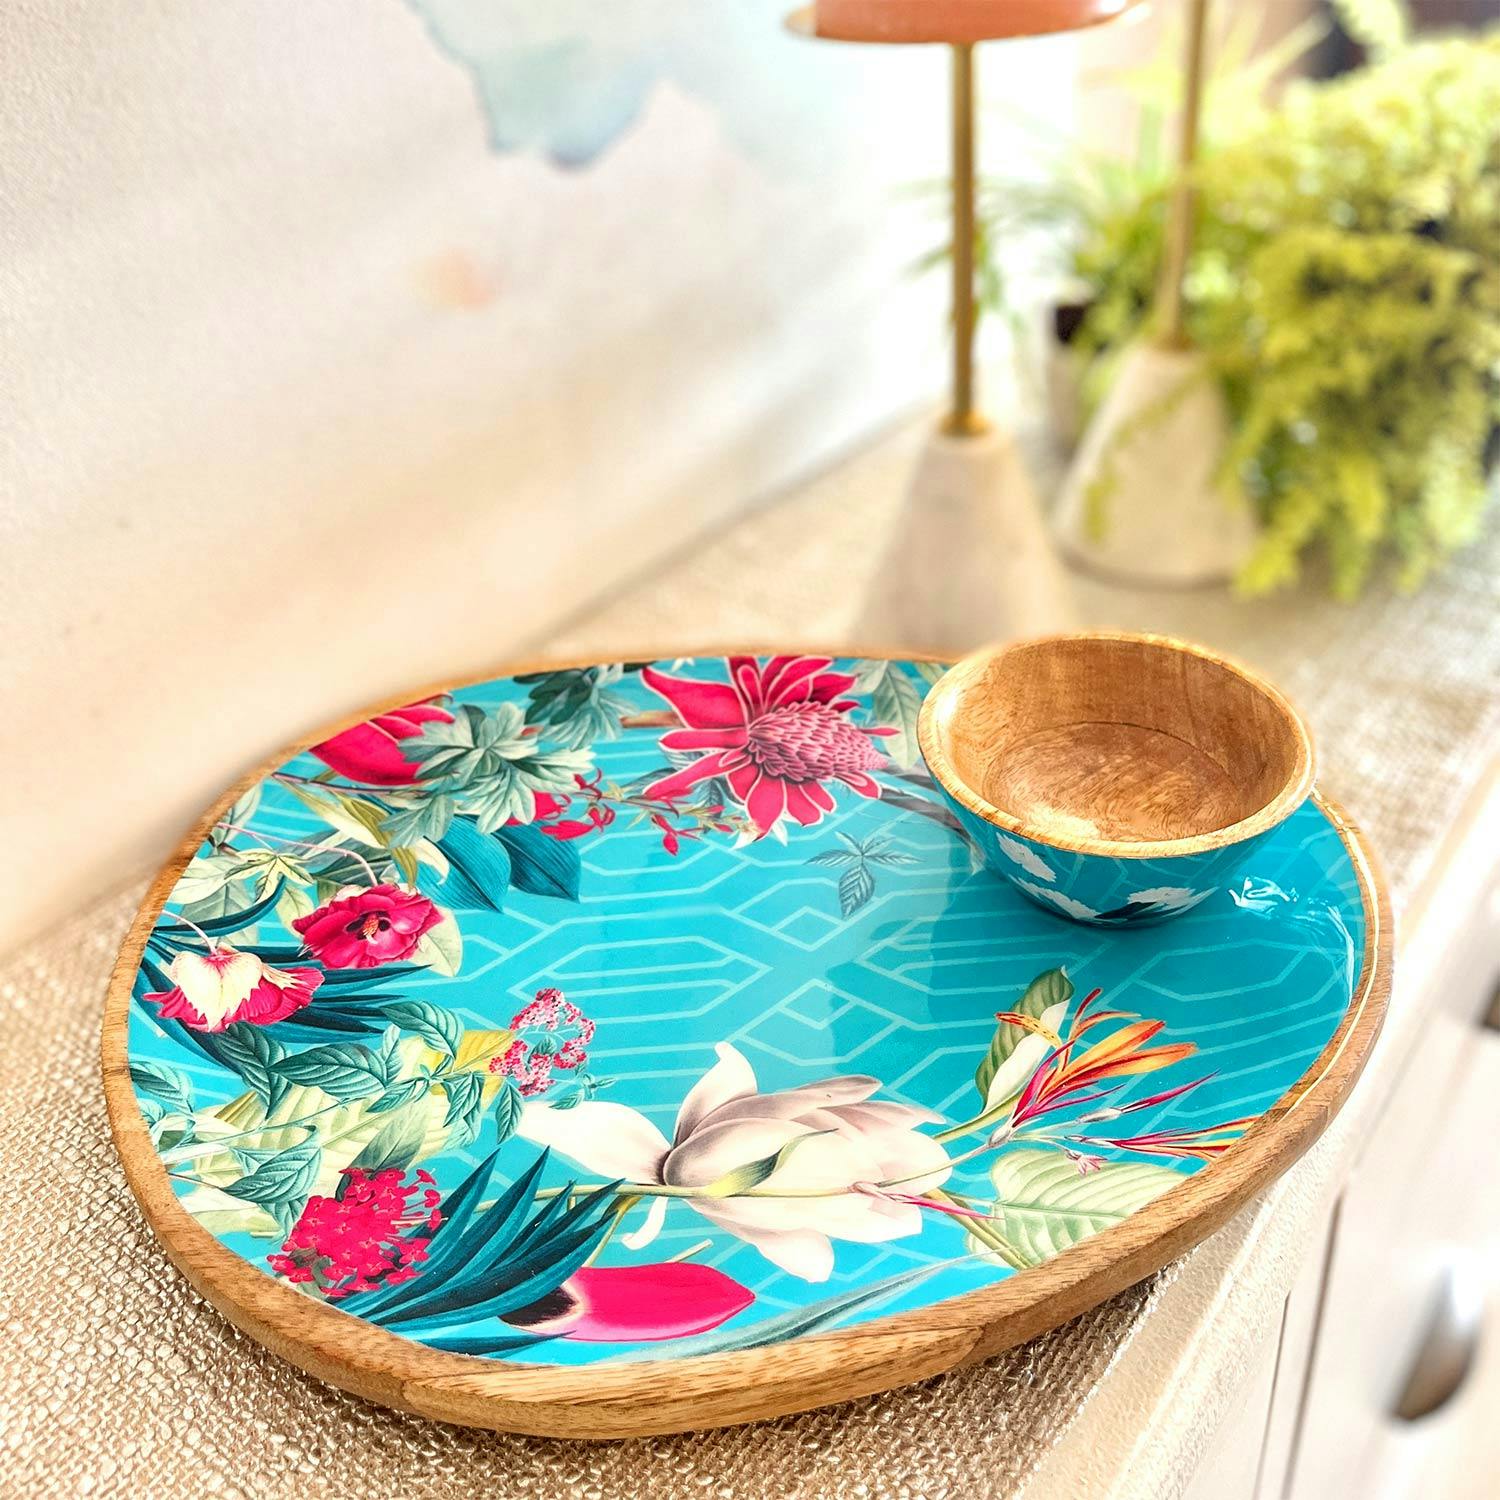 Large Oval Platter with Dip Bowl - Chilean Deco, a product by Faaya Gifting